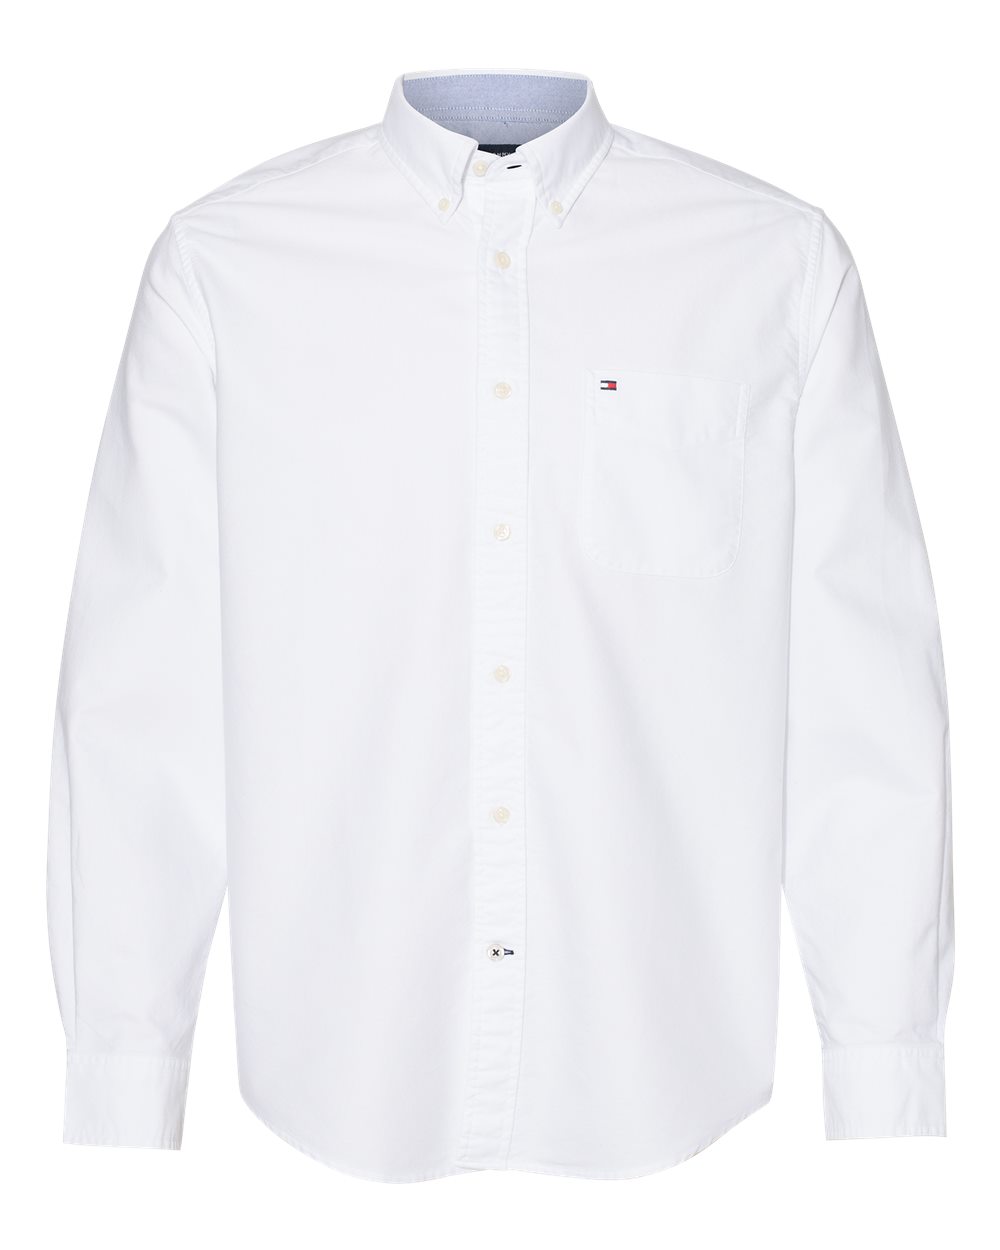 Tommy Hilfiger 13H1864 - New England Solid Oxford Shirt